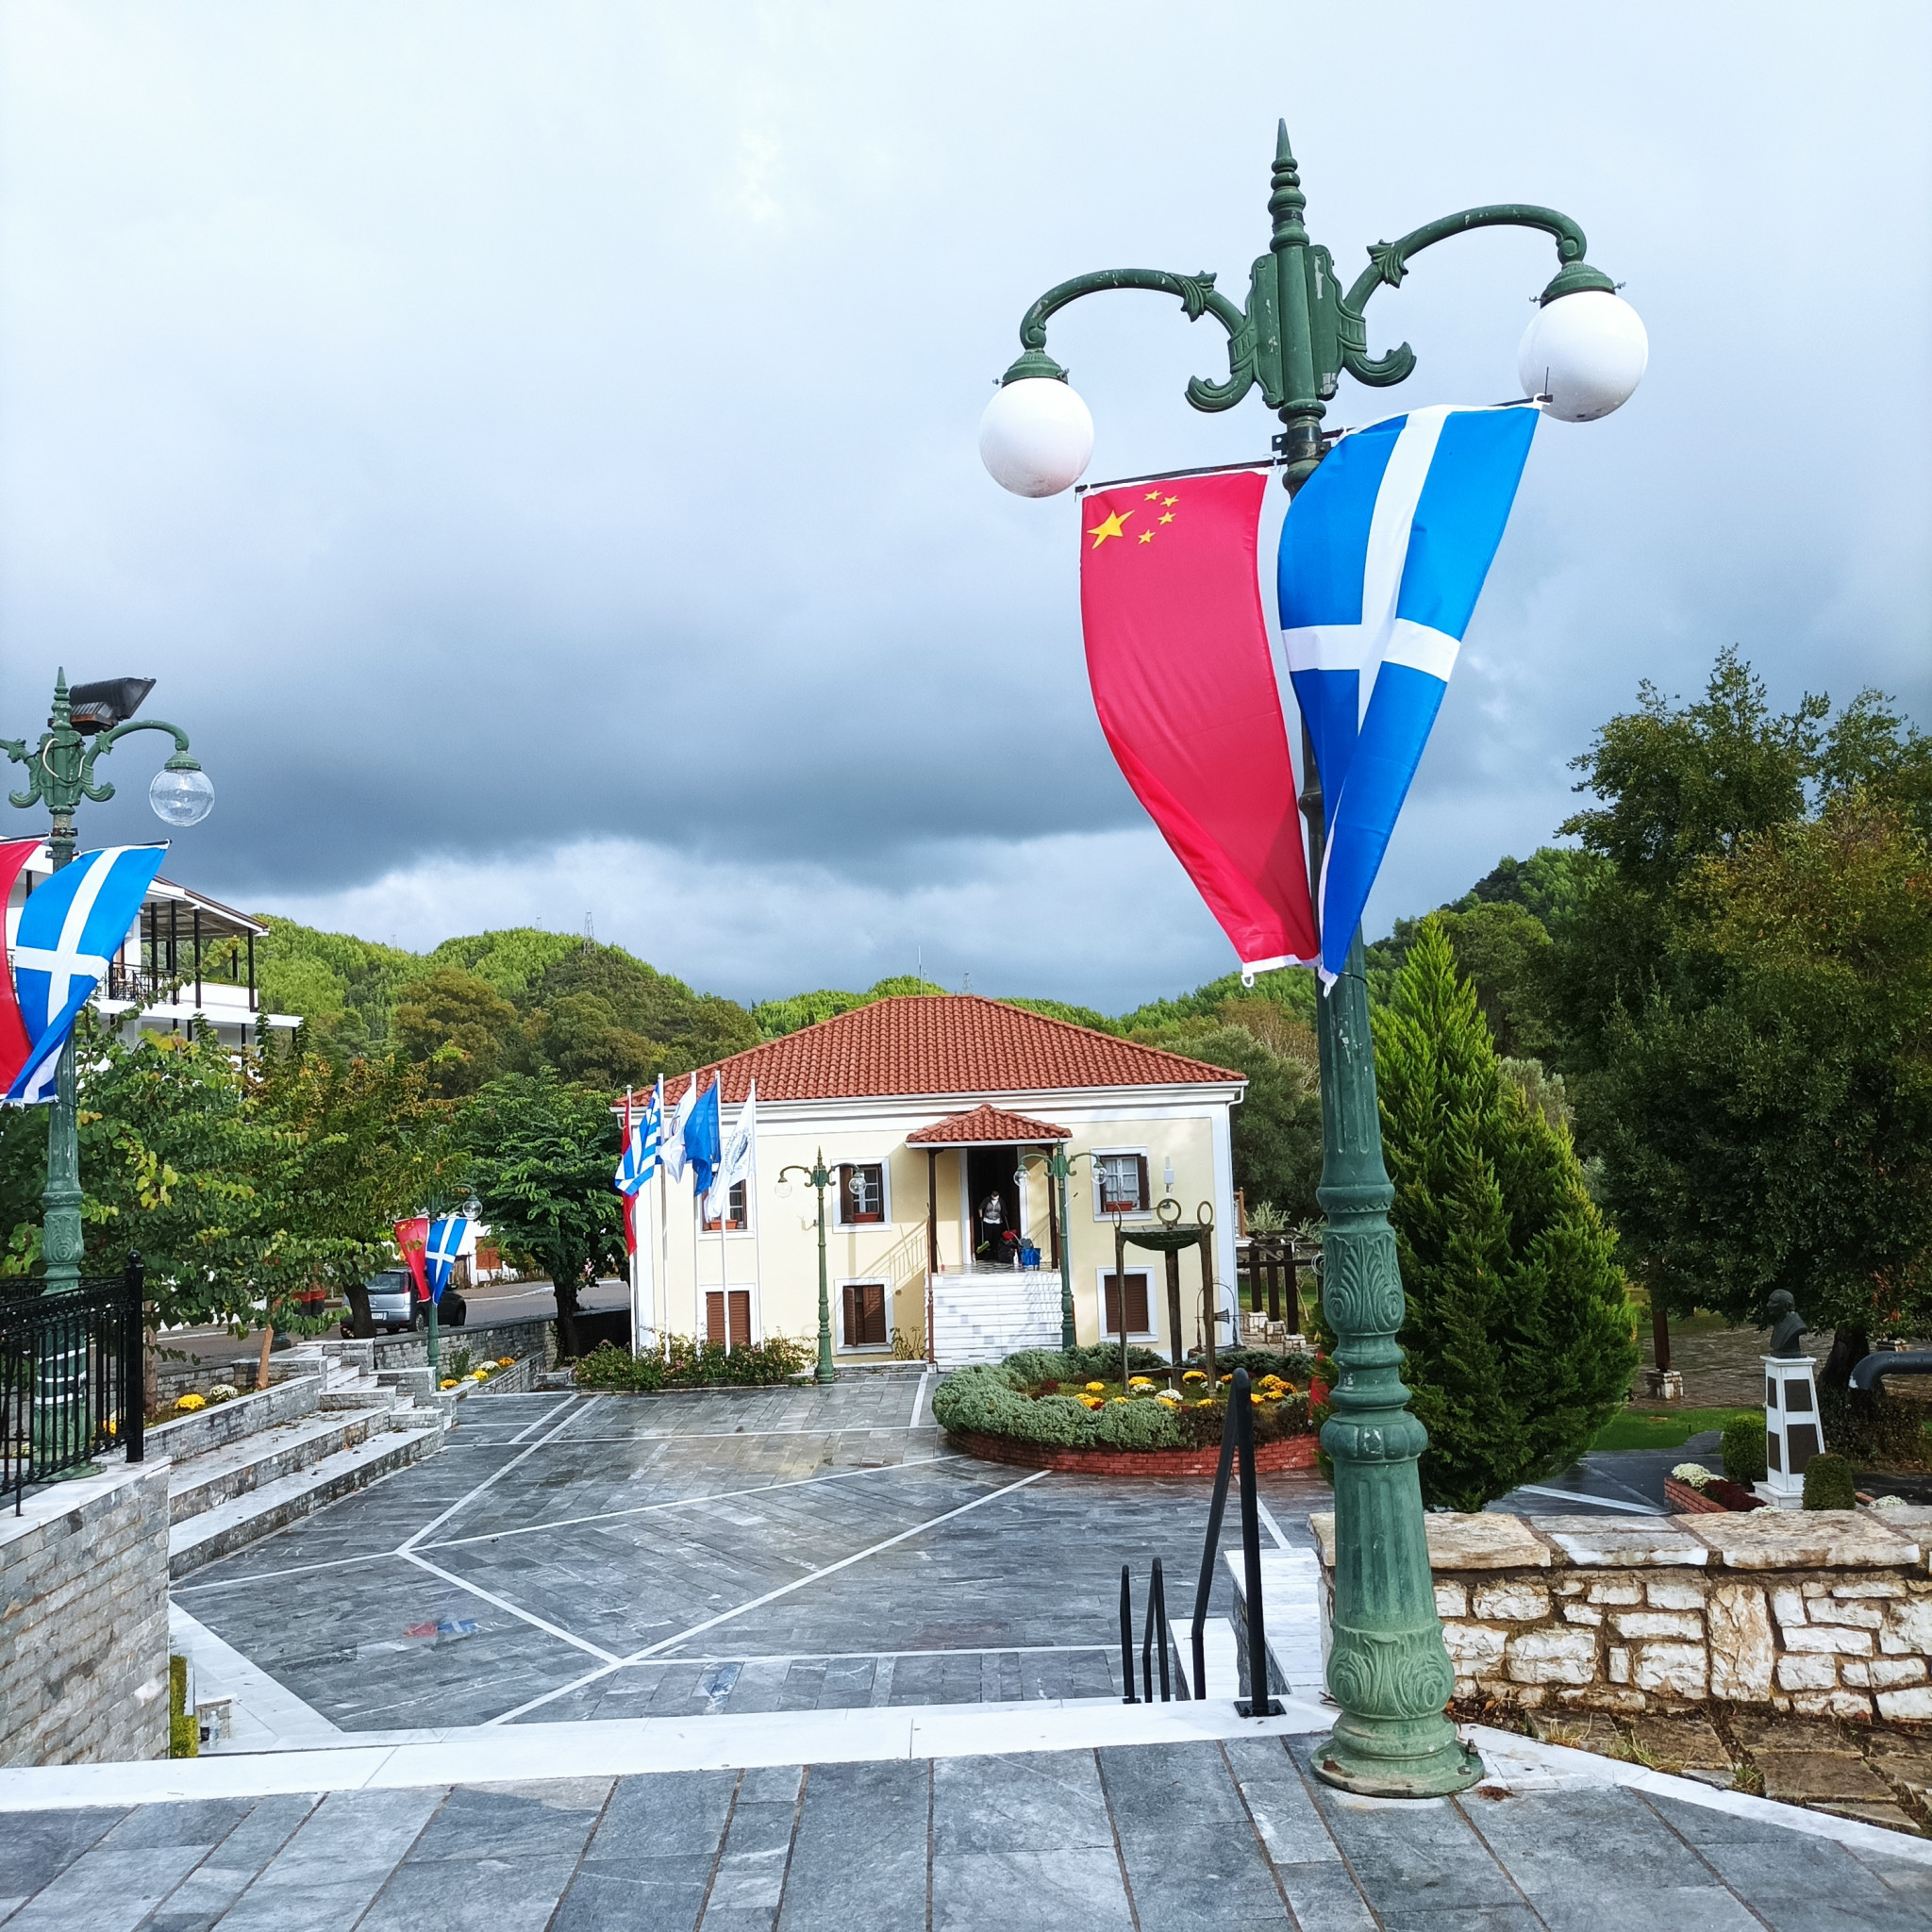 The Chinese and Greek flags pictured outside the Town Hall in Ancient Olympia ©ITG 